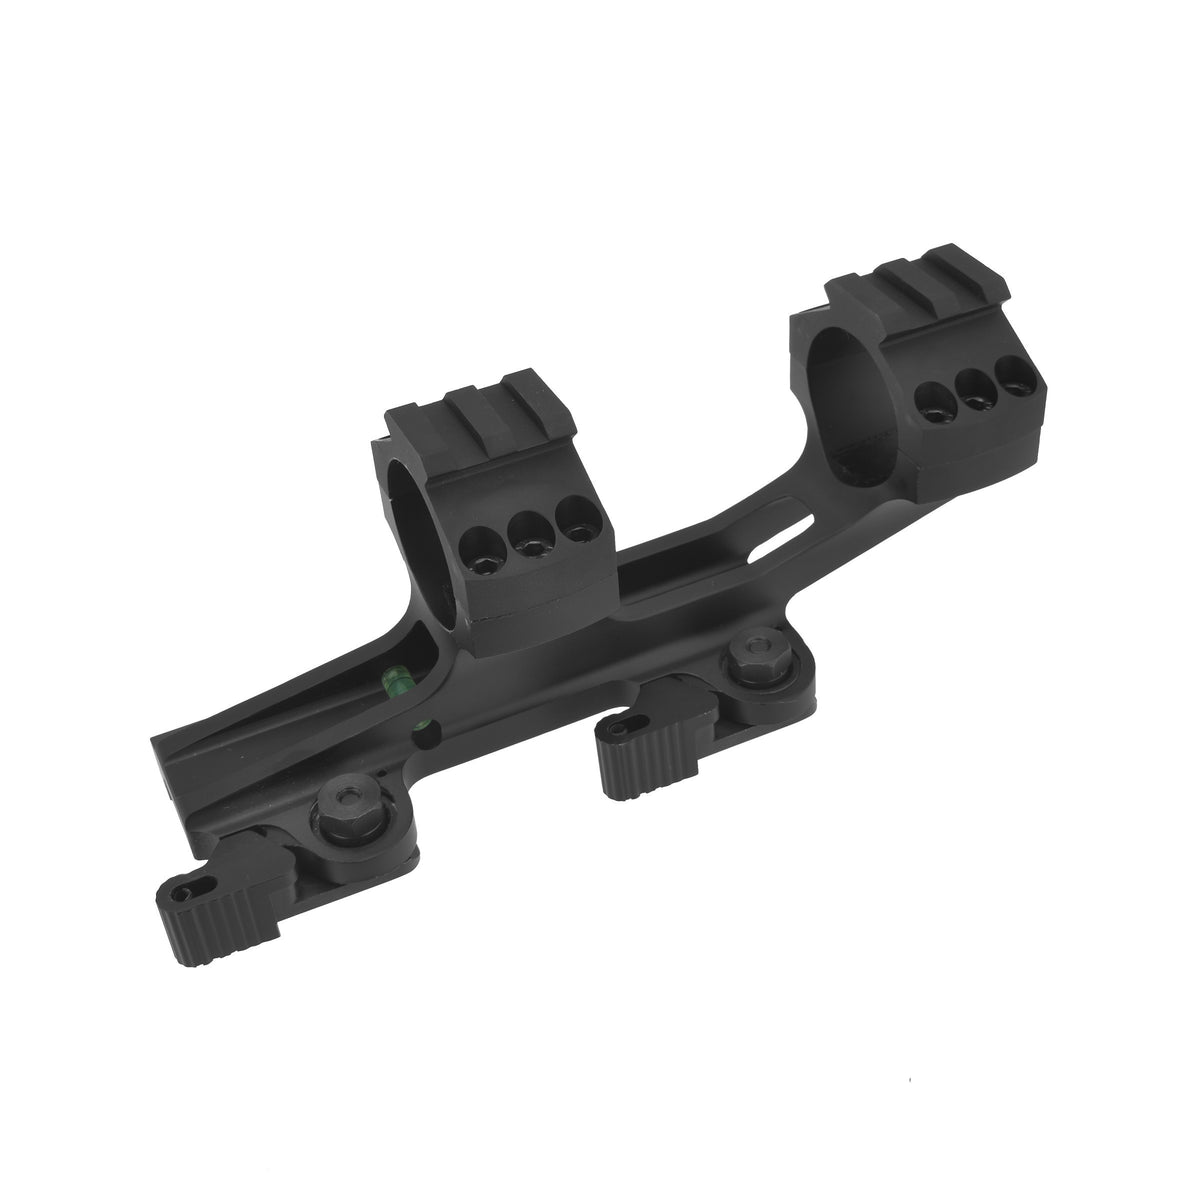 LaRue Style 25.4-30mm Cantilever Mount